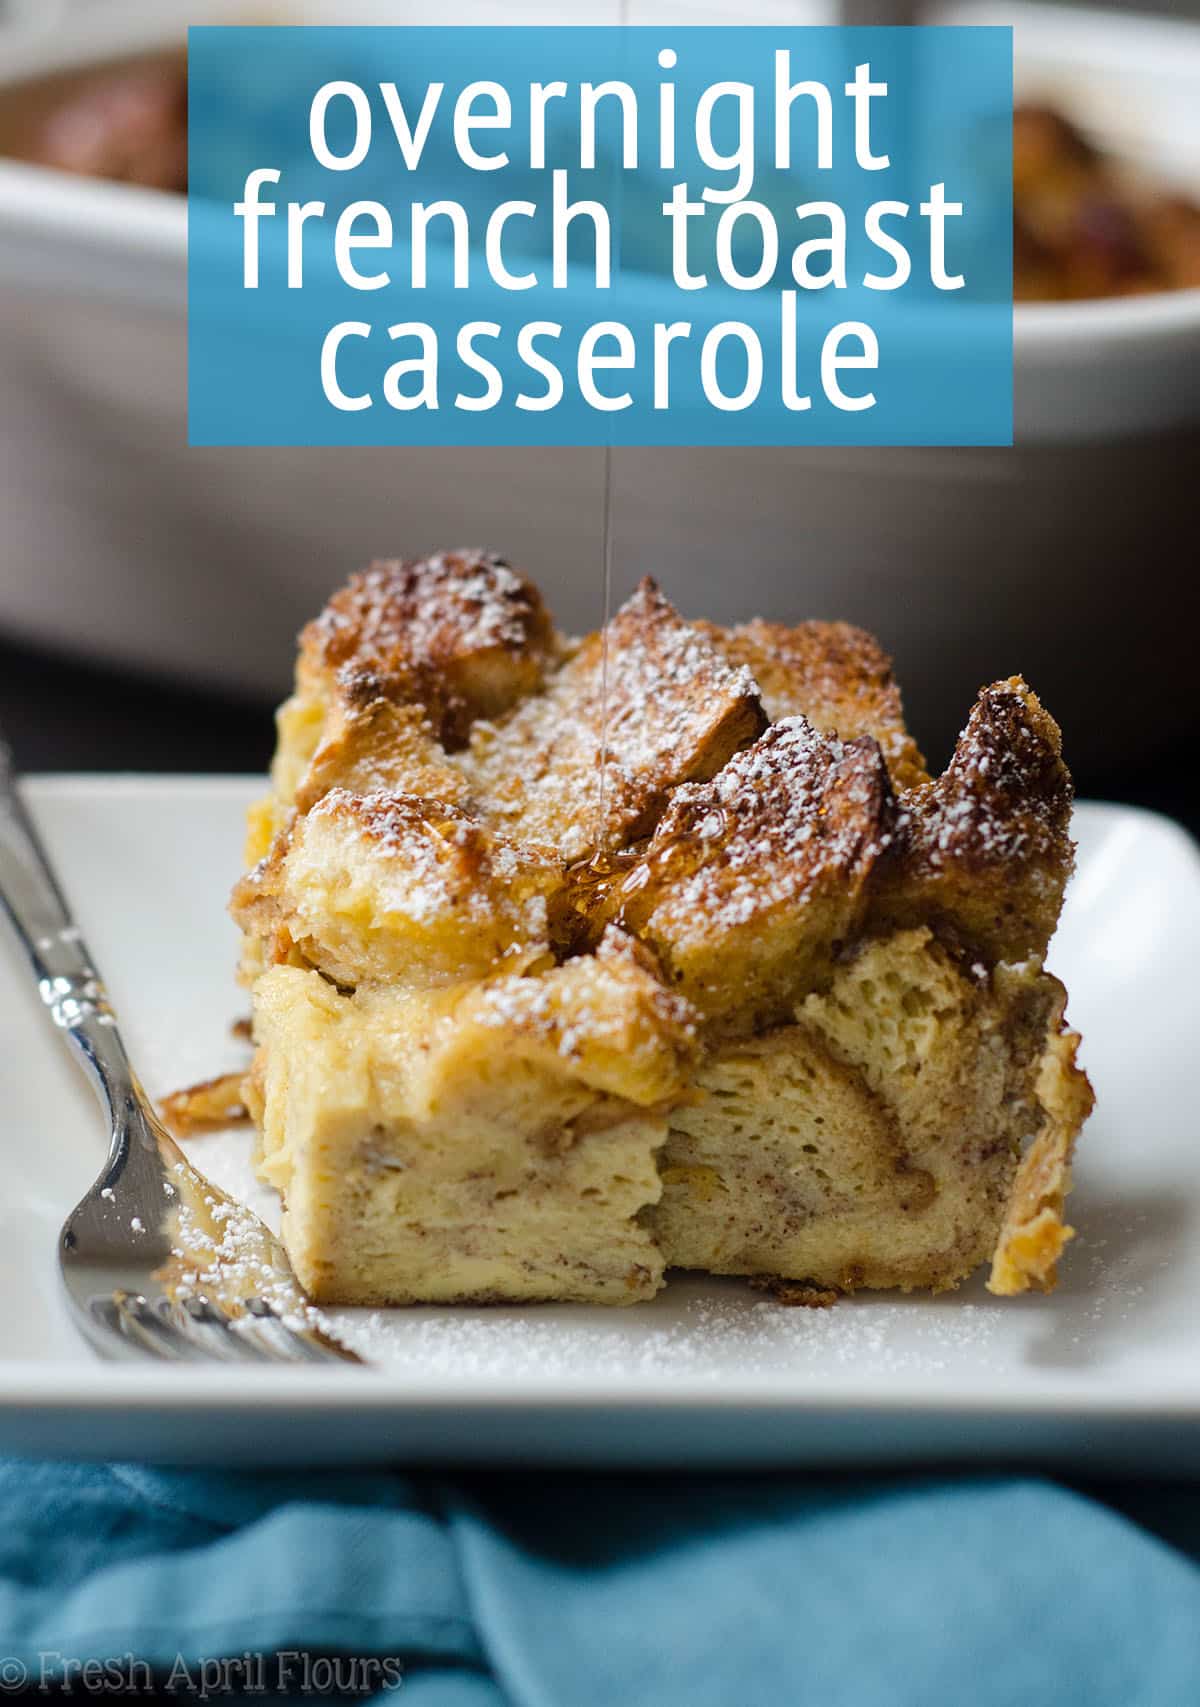 This easy make ahead French toast casserole recipe is great for entertaining and saves you from standing over a griddle or stovetop all morning. via @frshaprilflours